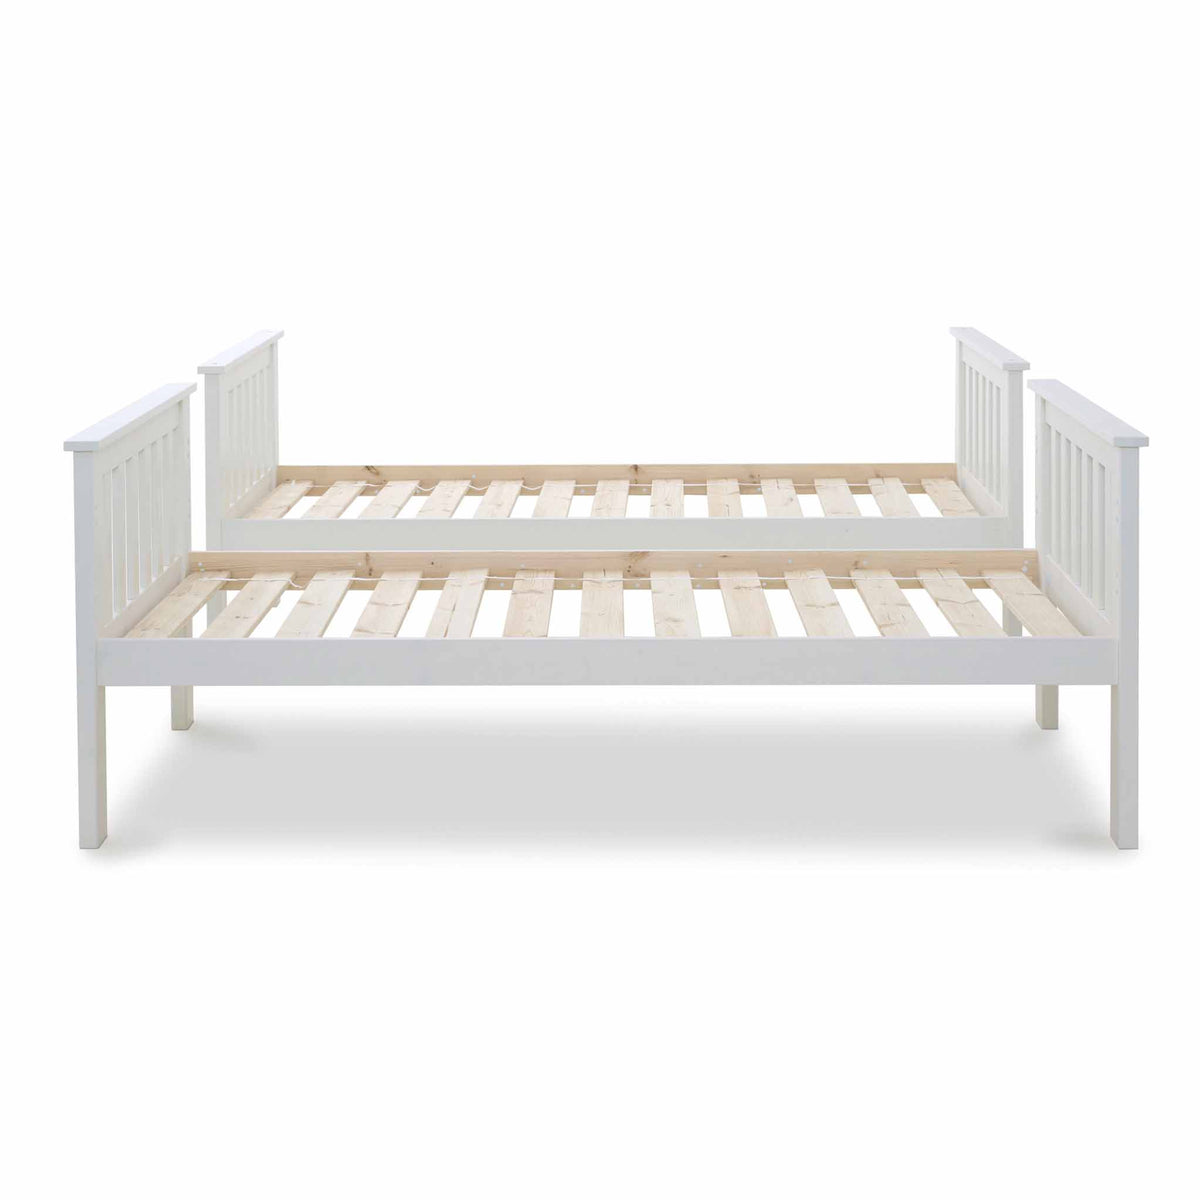 pair of single beds with pine slats from the Carlson White Detachable Single Bunk Beds